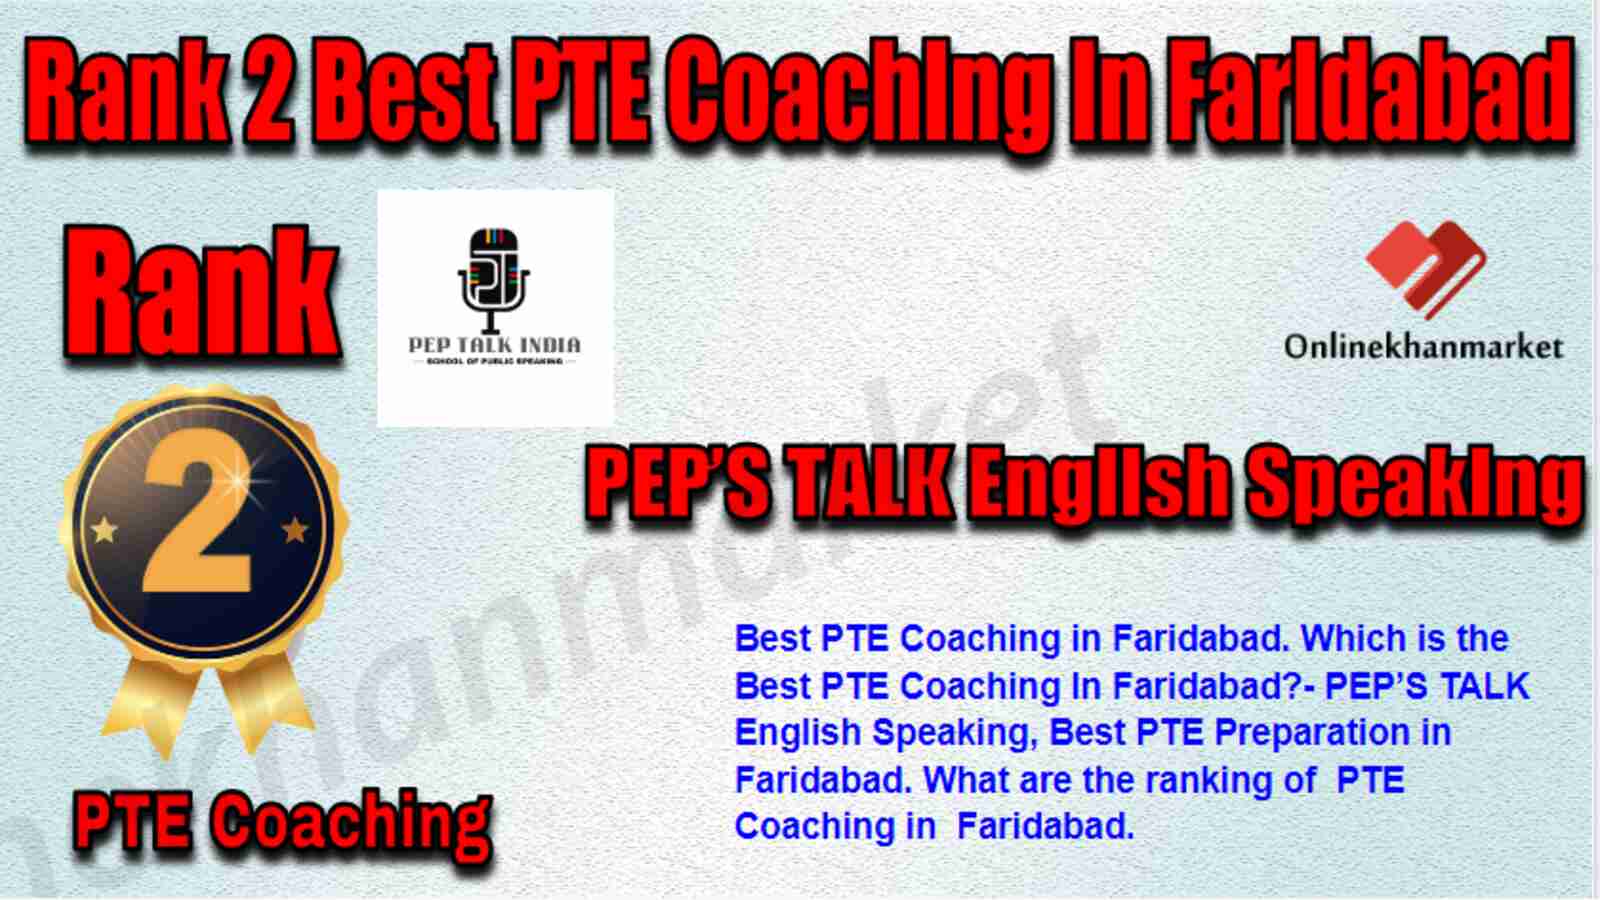 Rank 2 Best PTE Coaching in Faridabad